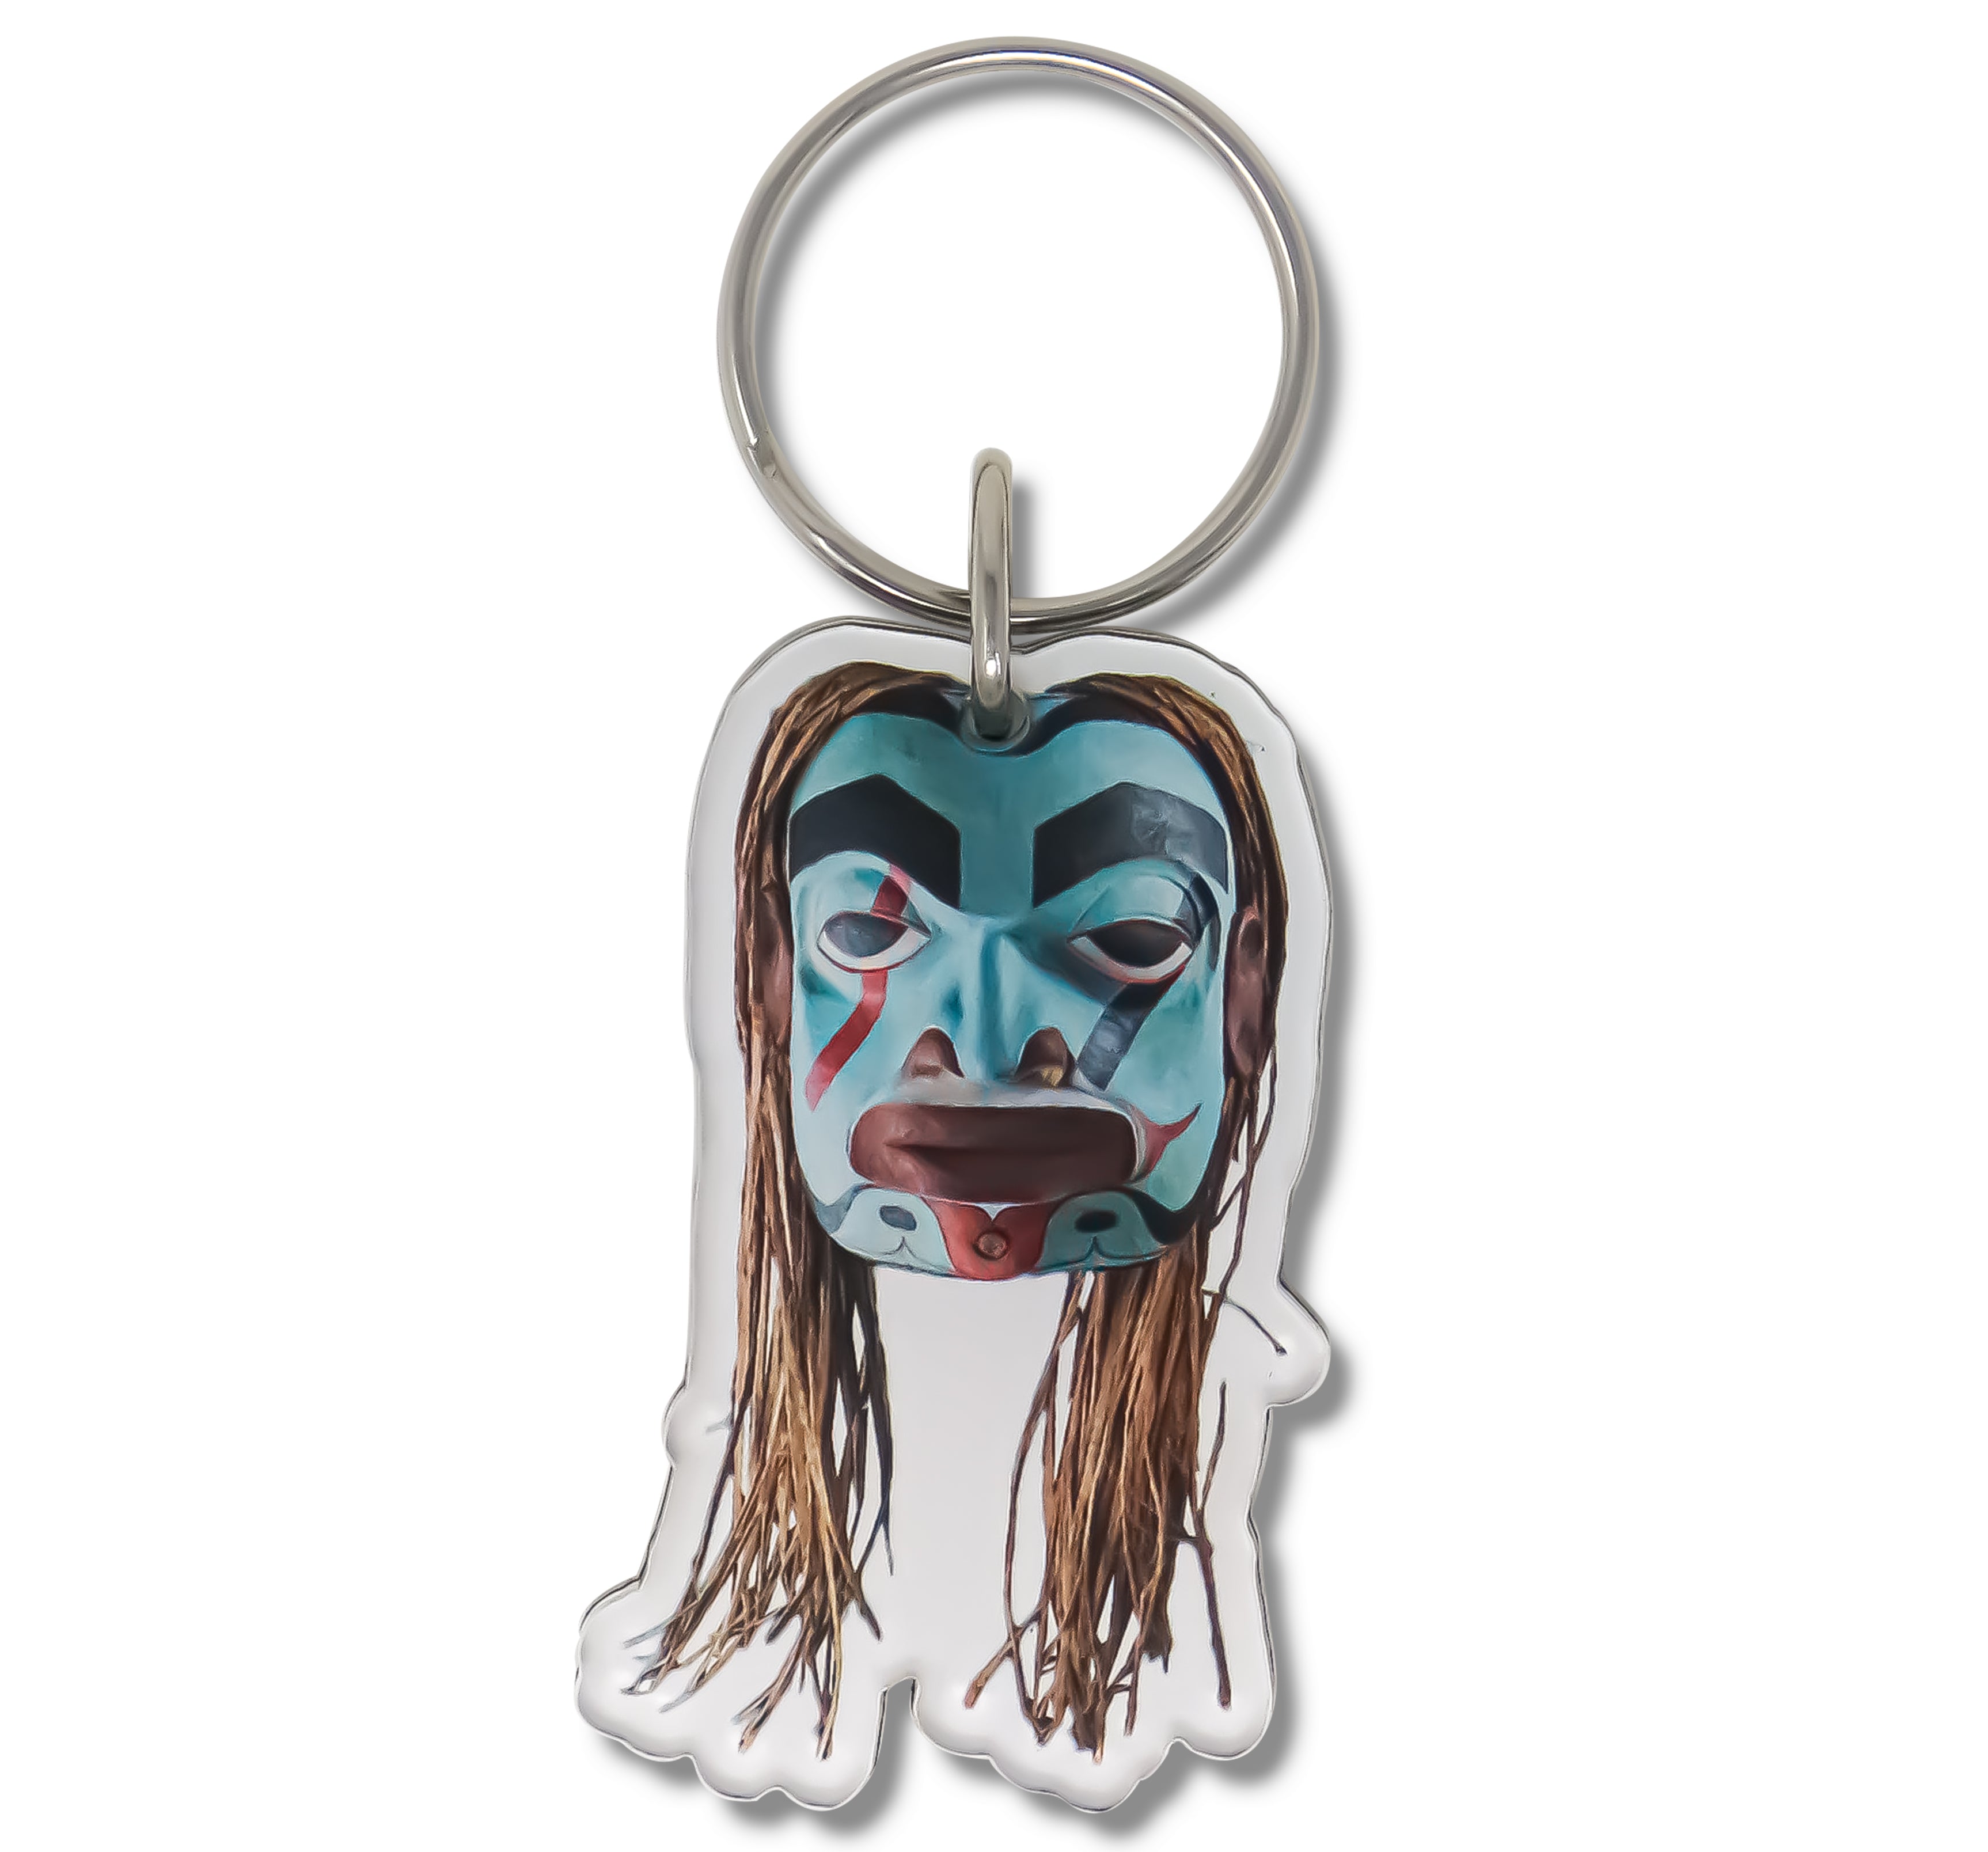 Alaskan Native Female Shaman Acrylic Key Ring originally carved and painted by Fred Fulmer Tlingit Artist